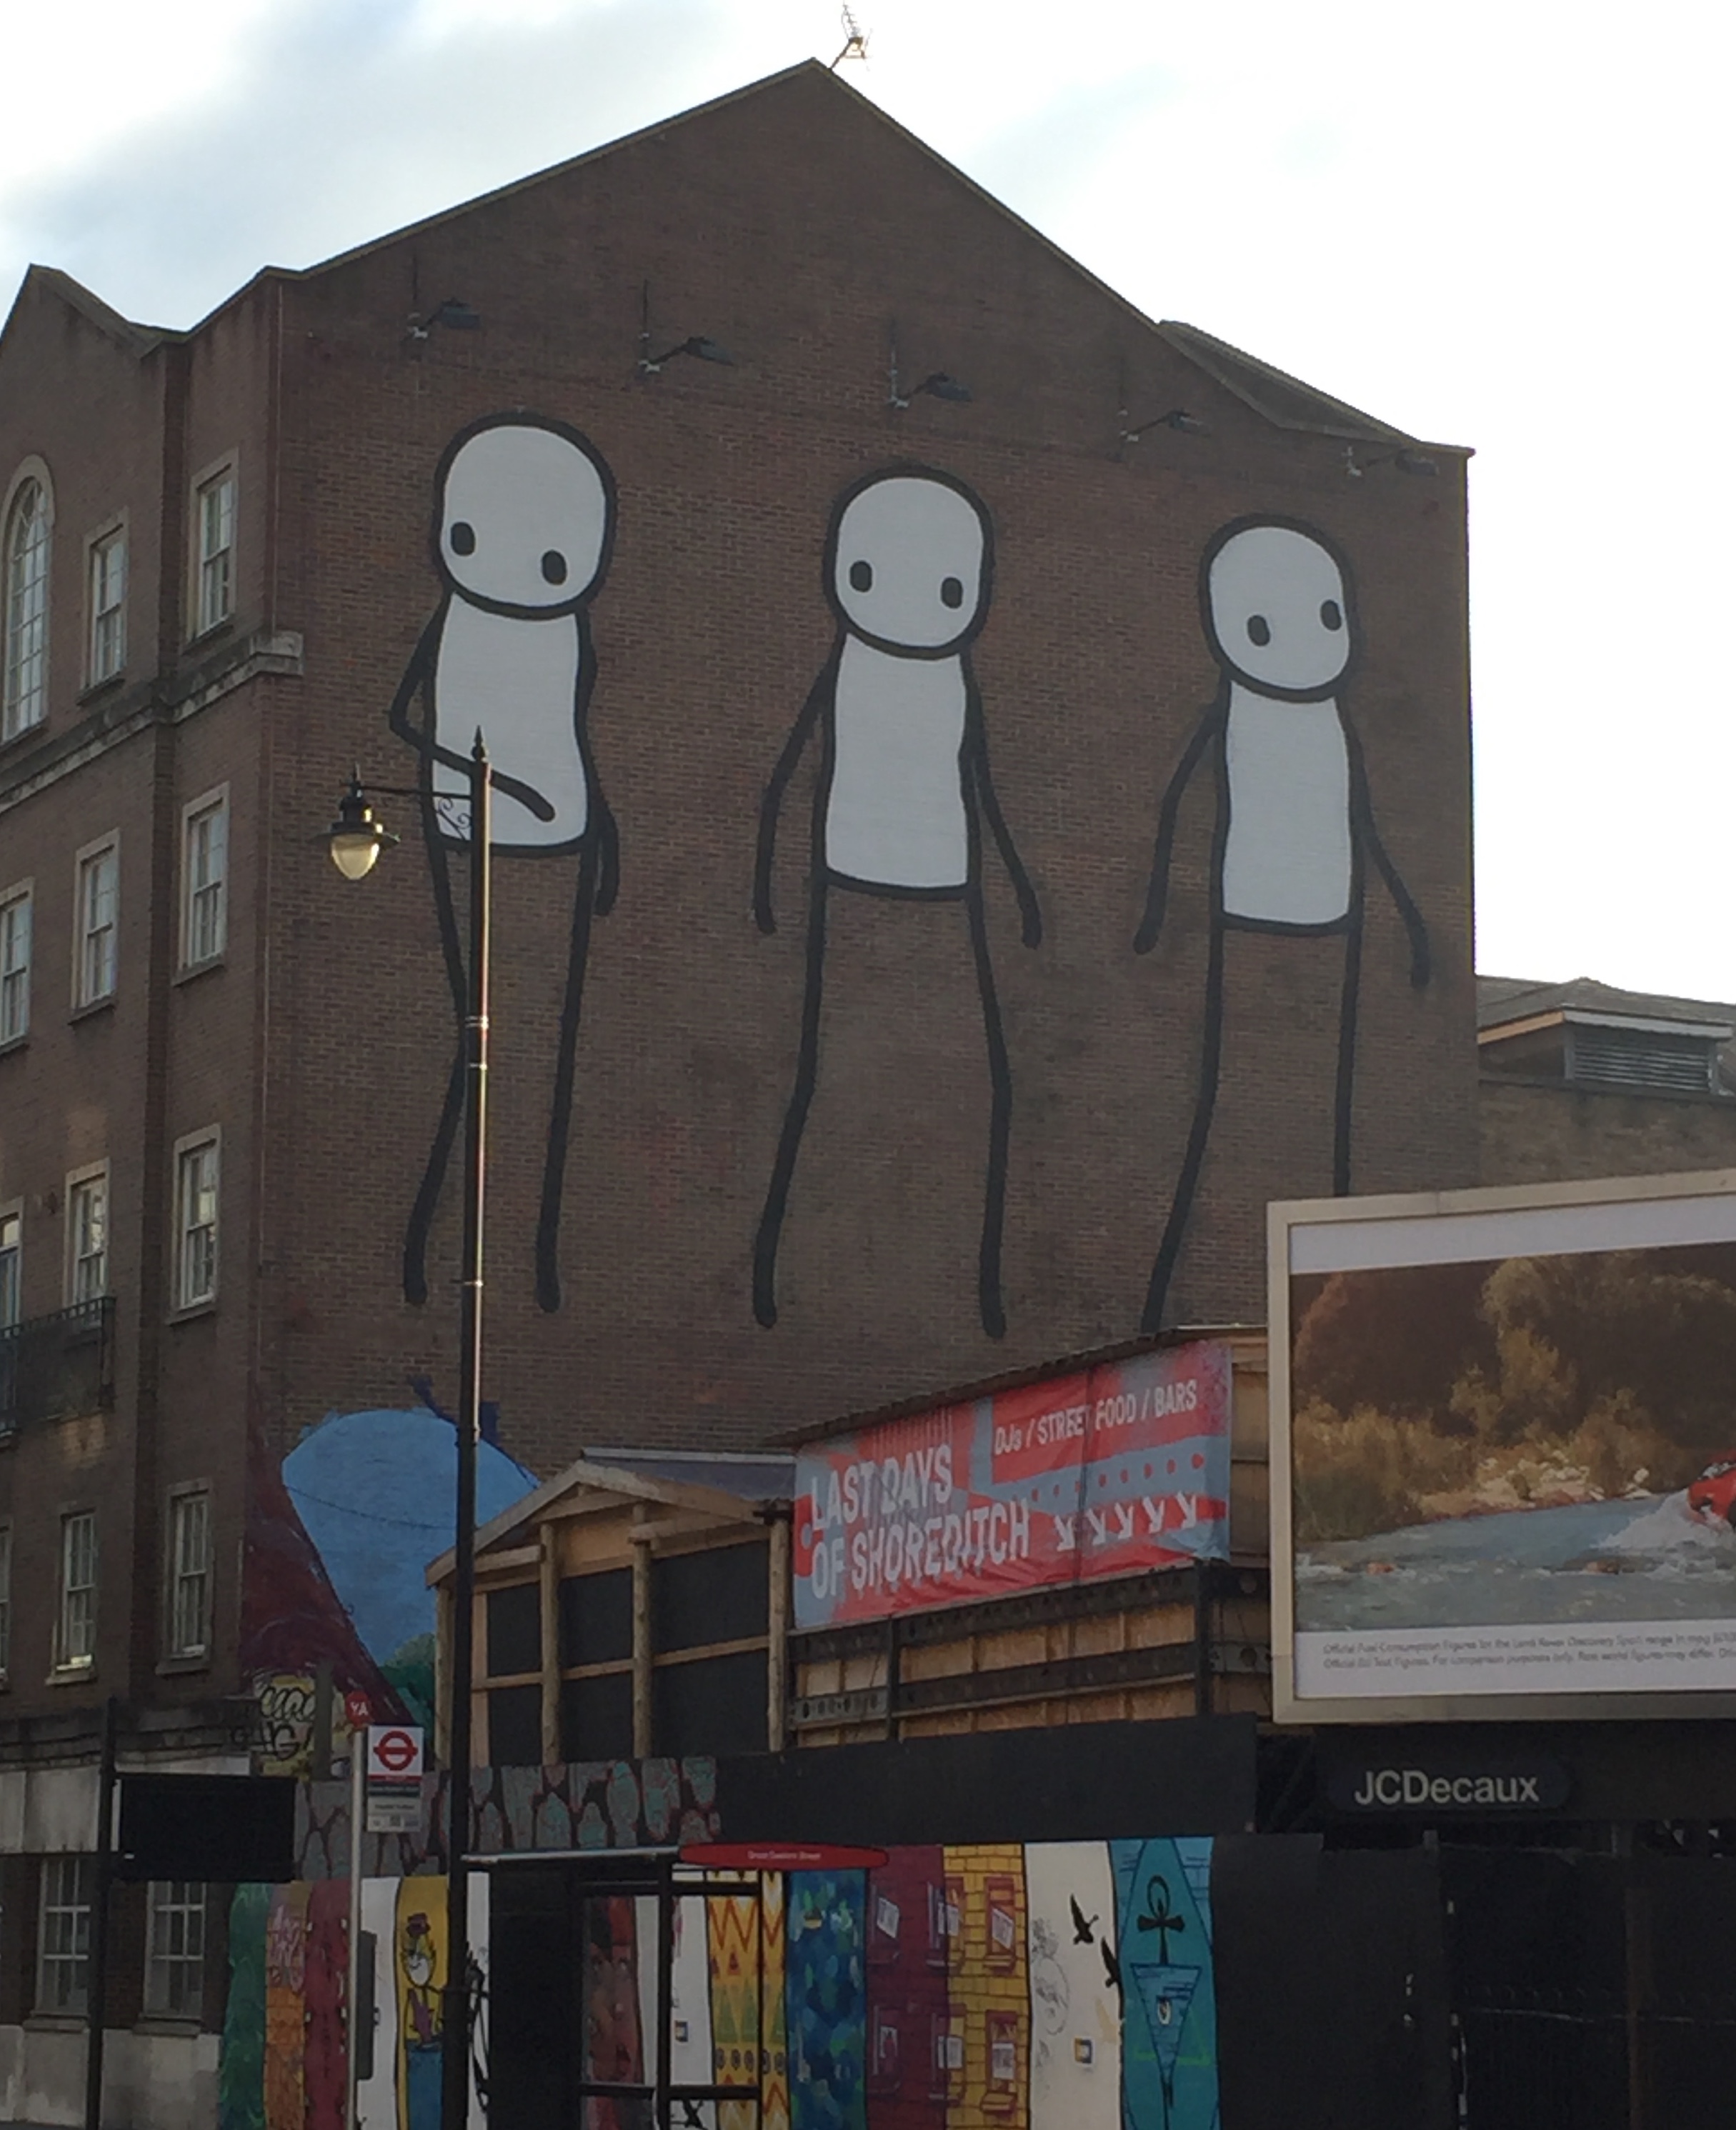 Stik street art in London (graffiti and high-end art) - No Snivelling - Home